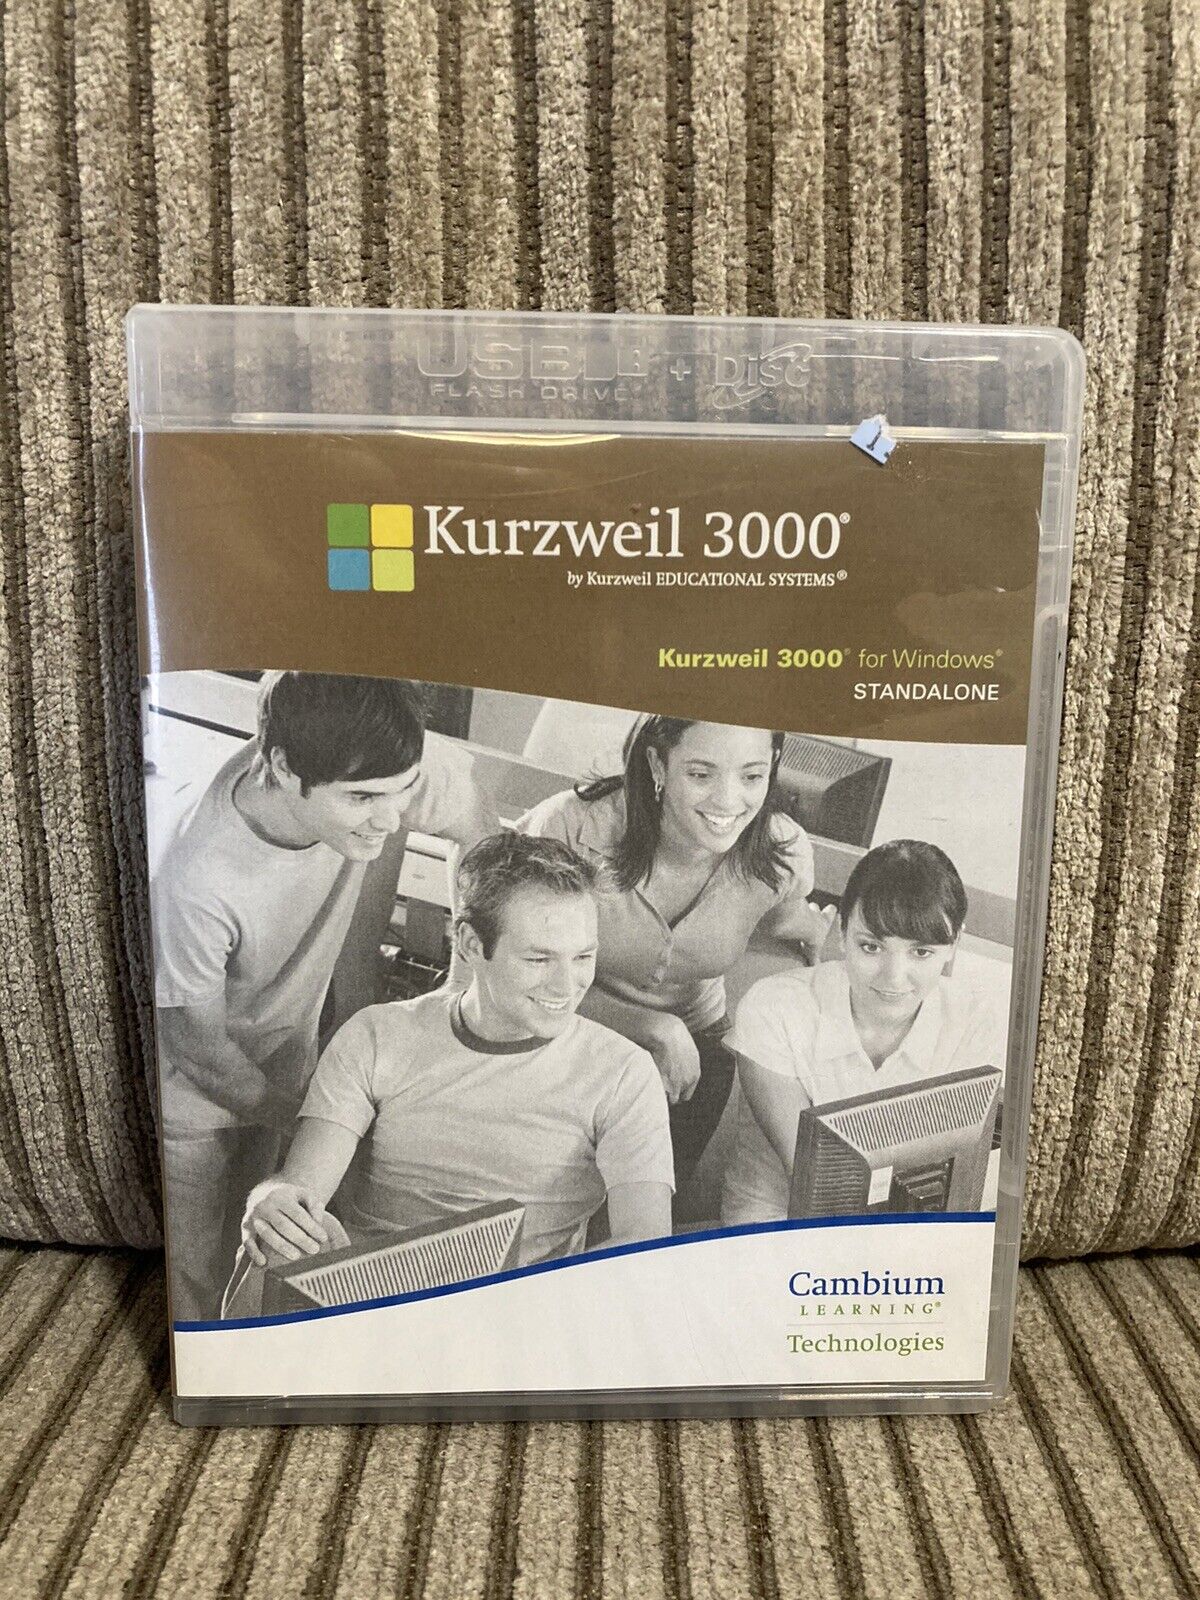 Kurzweil 3000 Educational Systems Software V13 For Windows Standalone PC Cambium